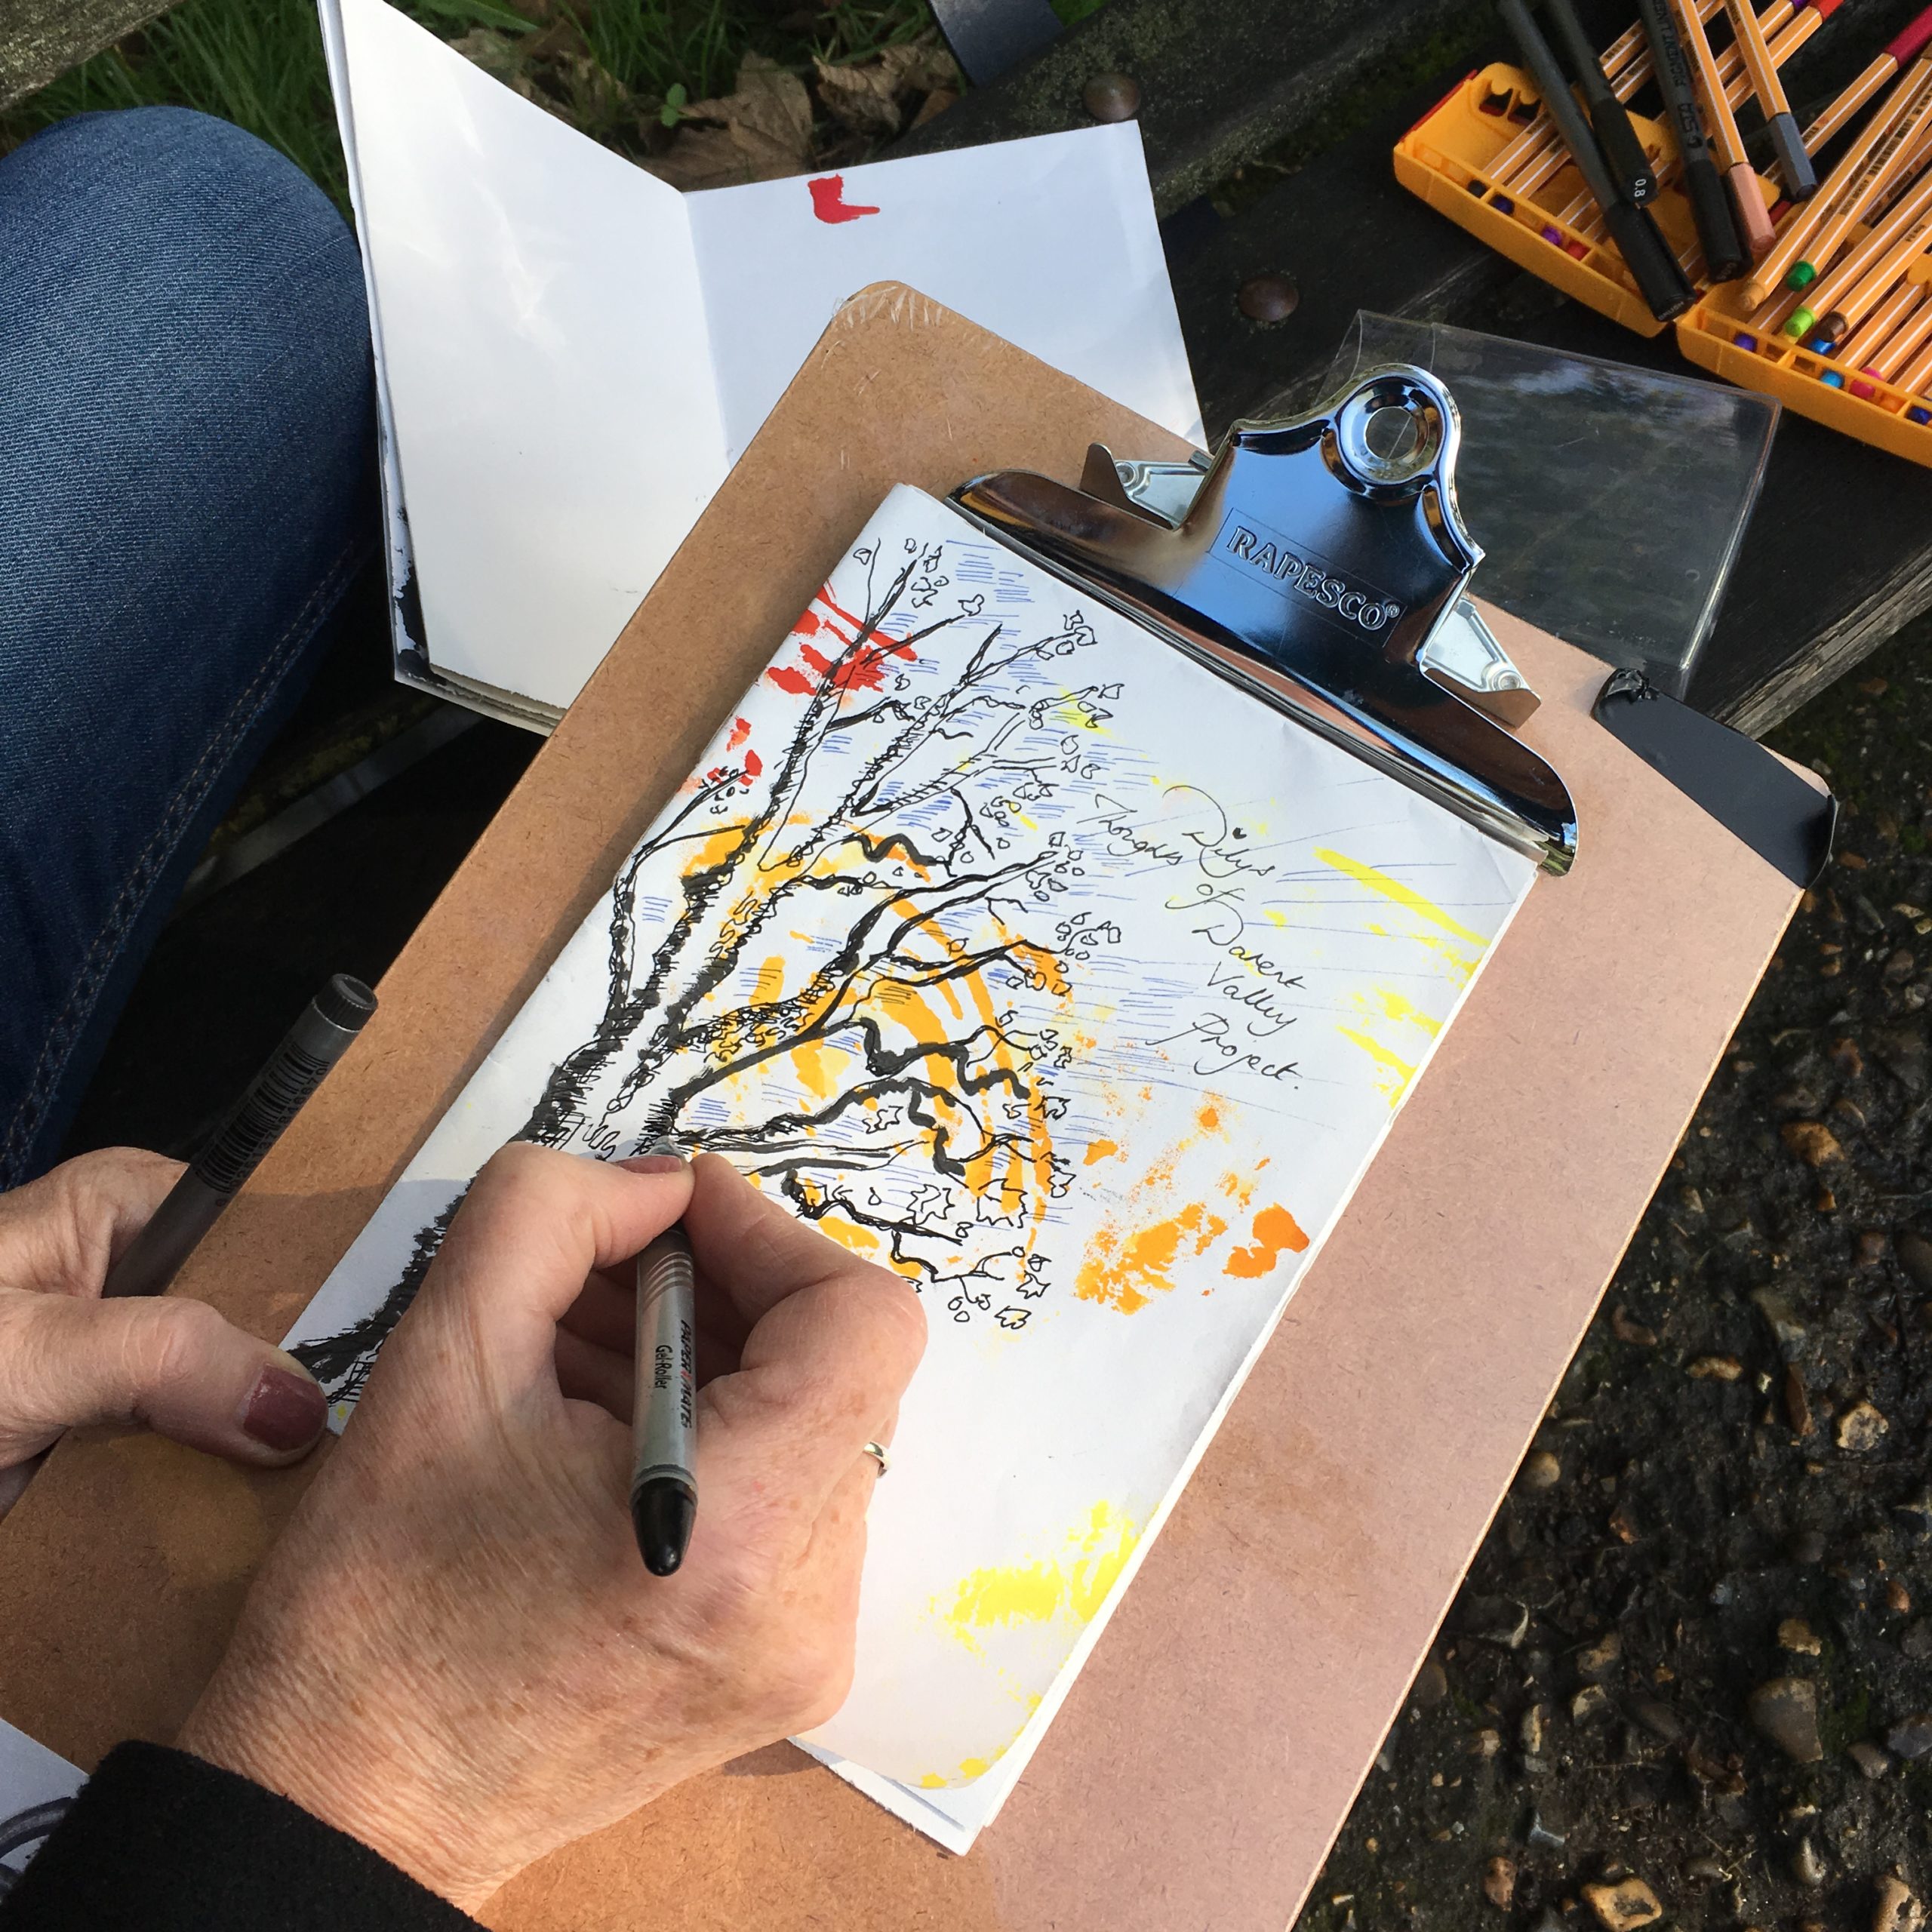 Clipboard with hand painting a tree on paper